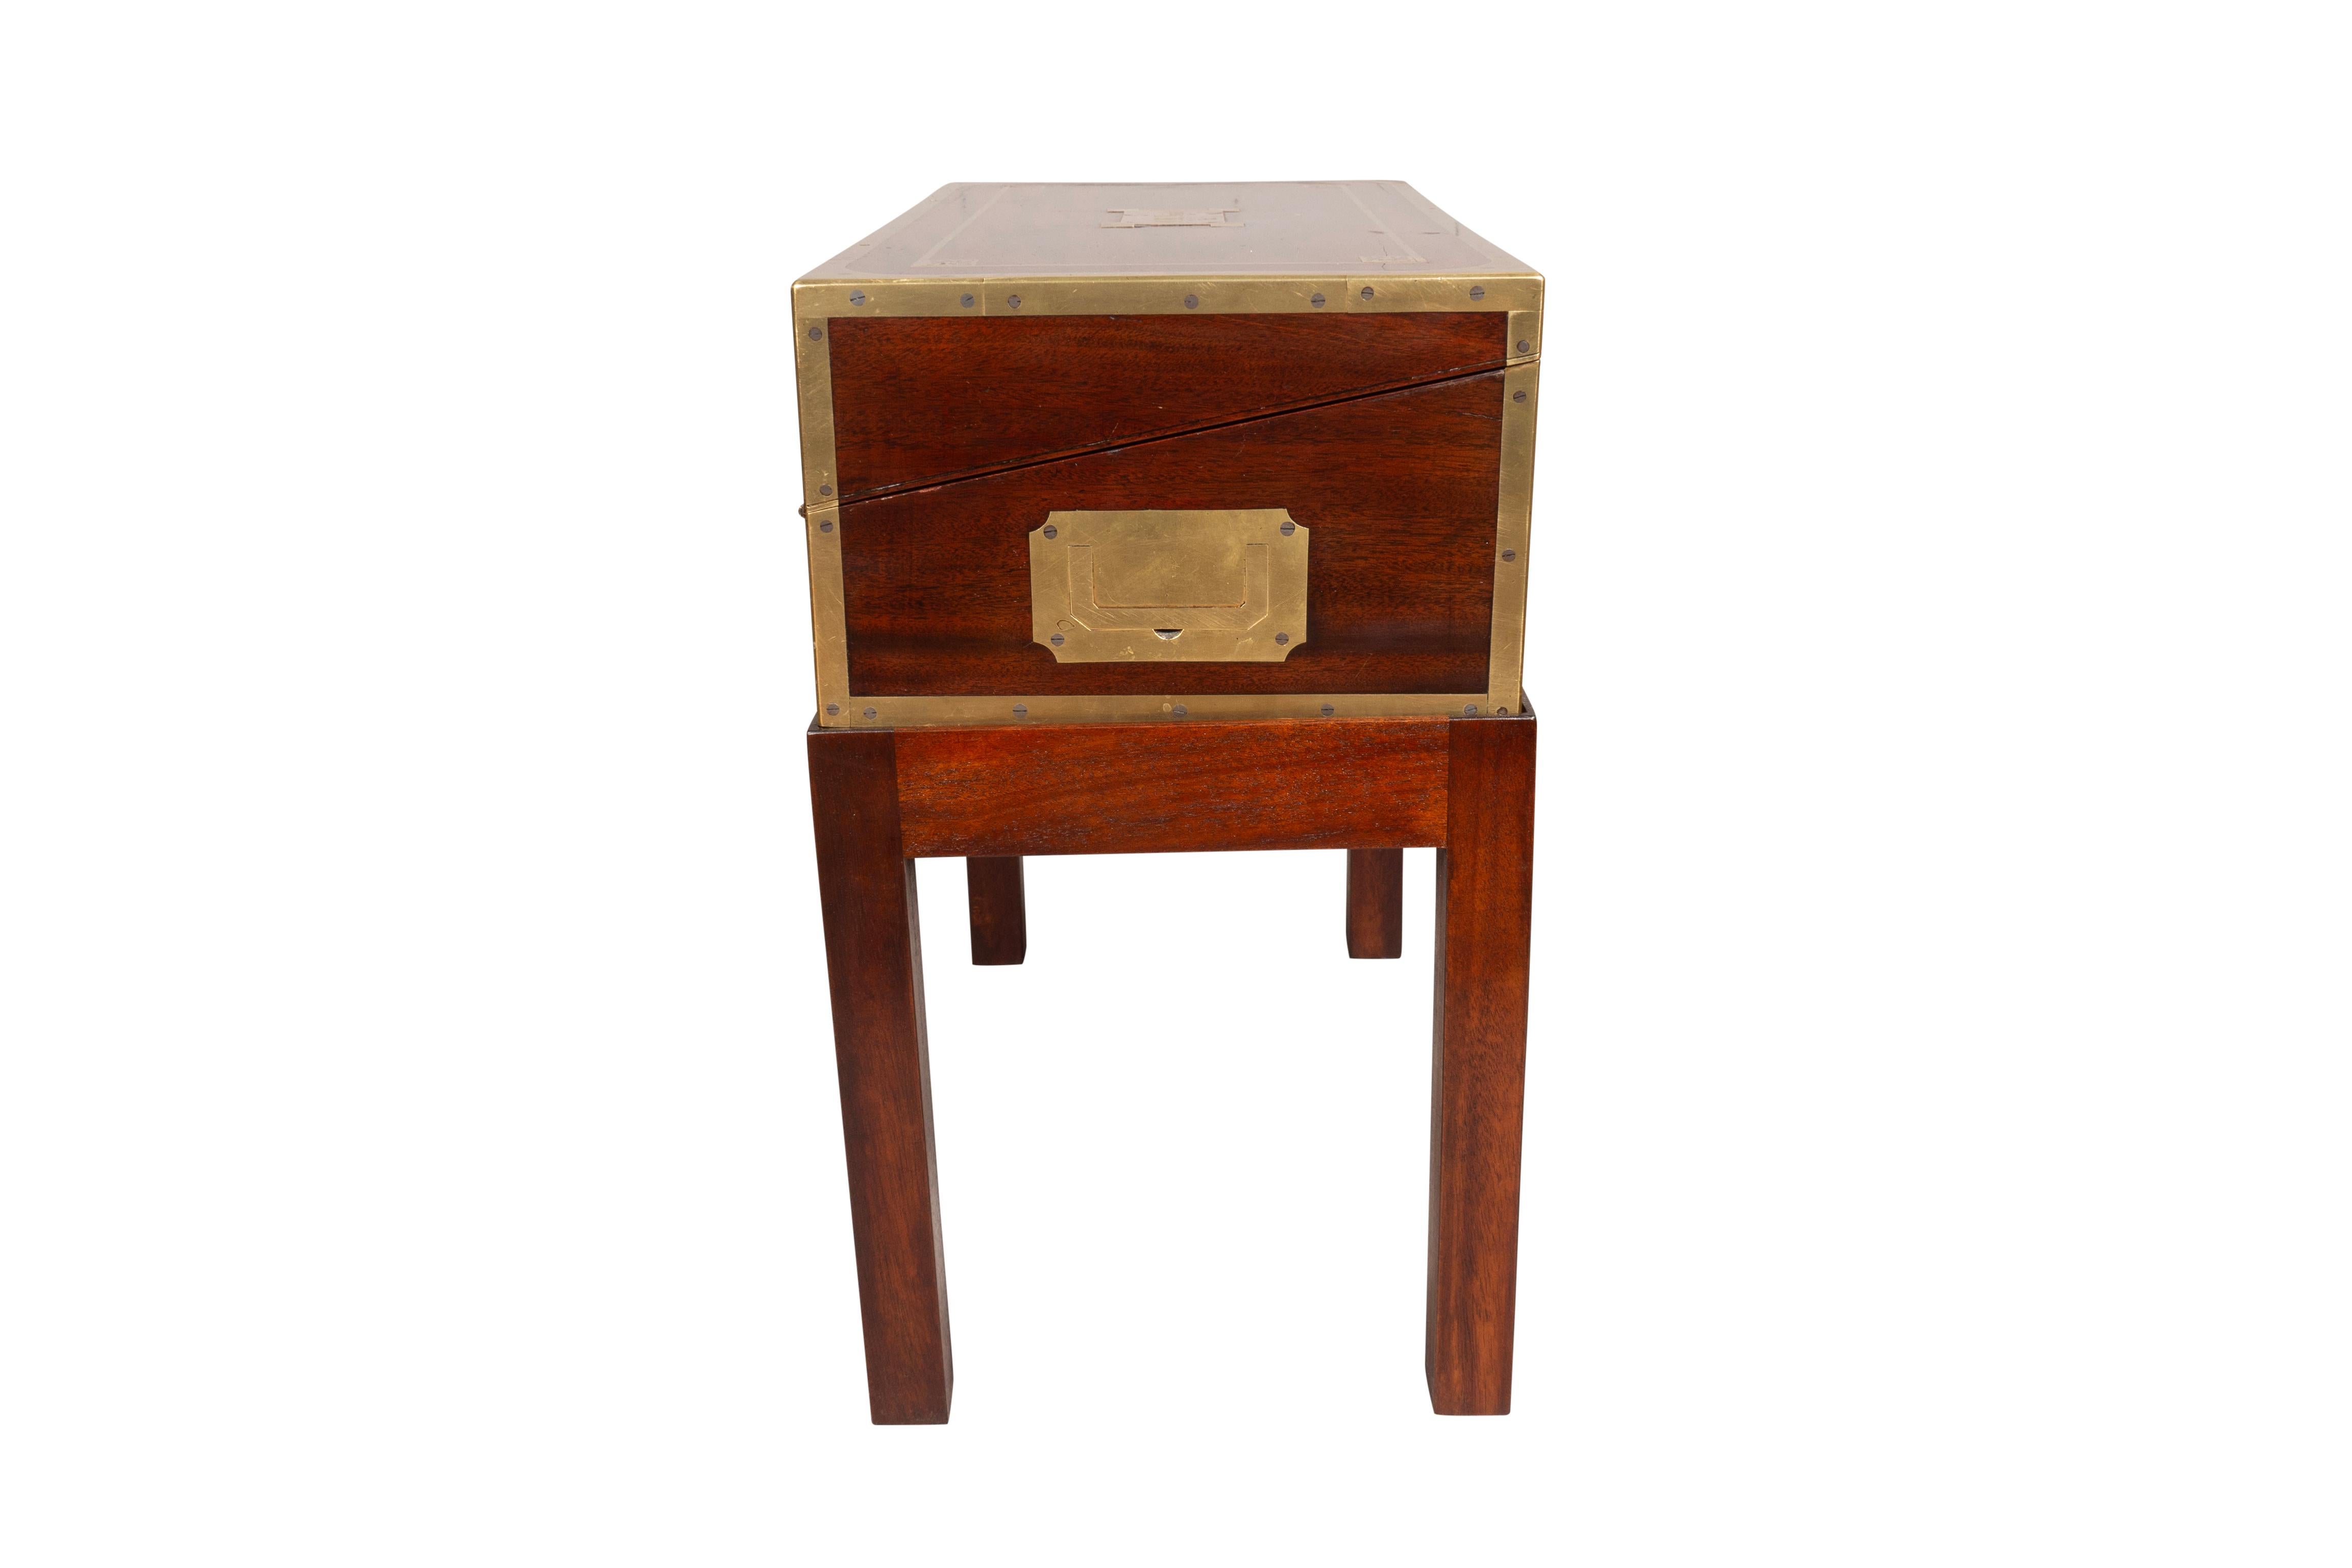 English Regency Mahogany And Brass Inlaid Campaign Box On Stand